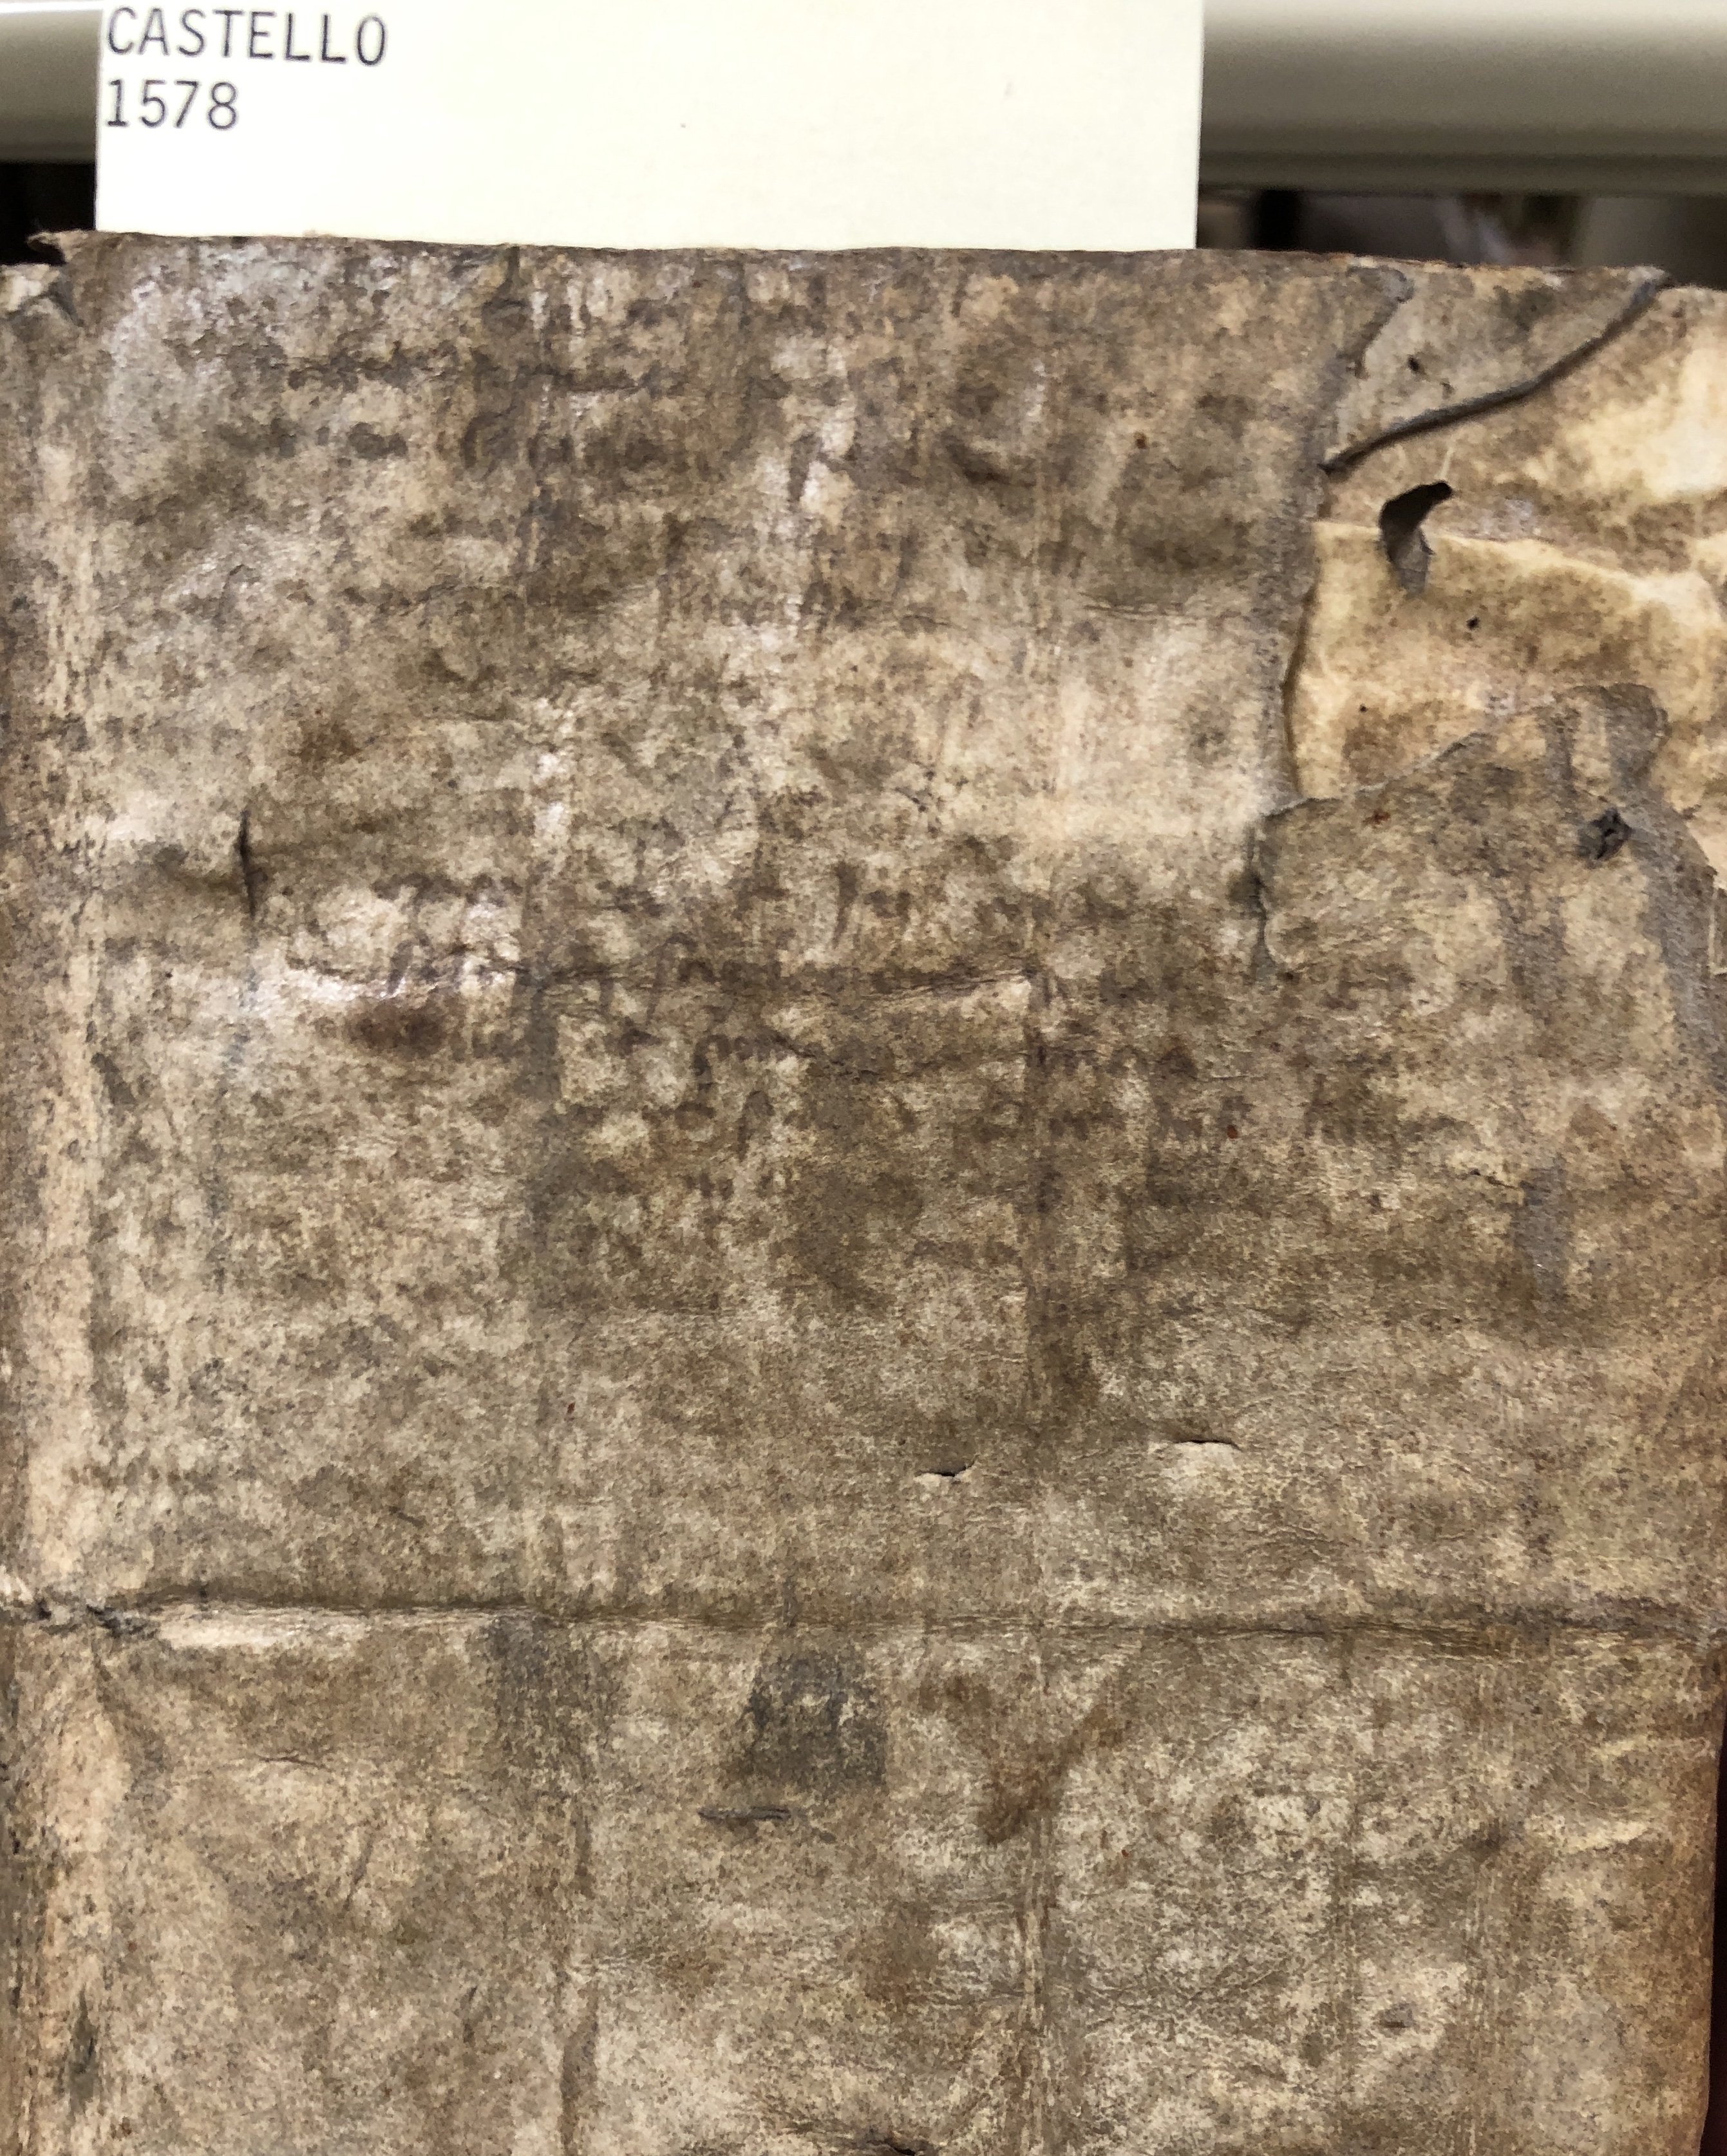 The manuscript writing on the cover of this 1578 book on feast days is faint and illegible